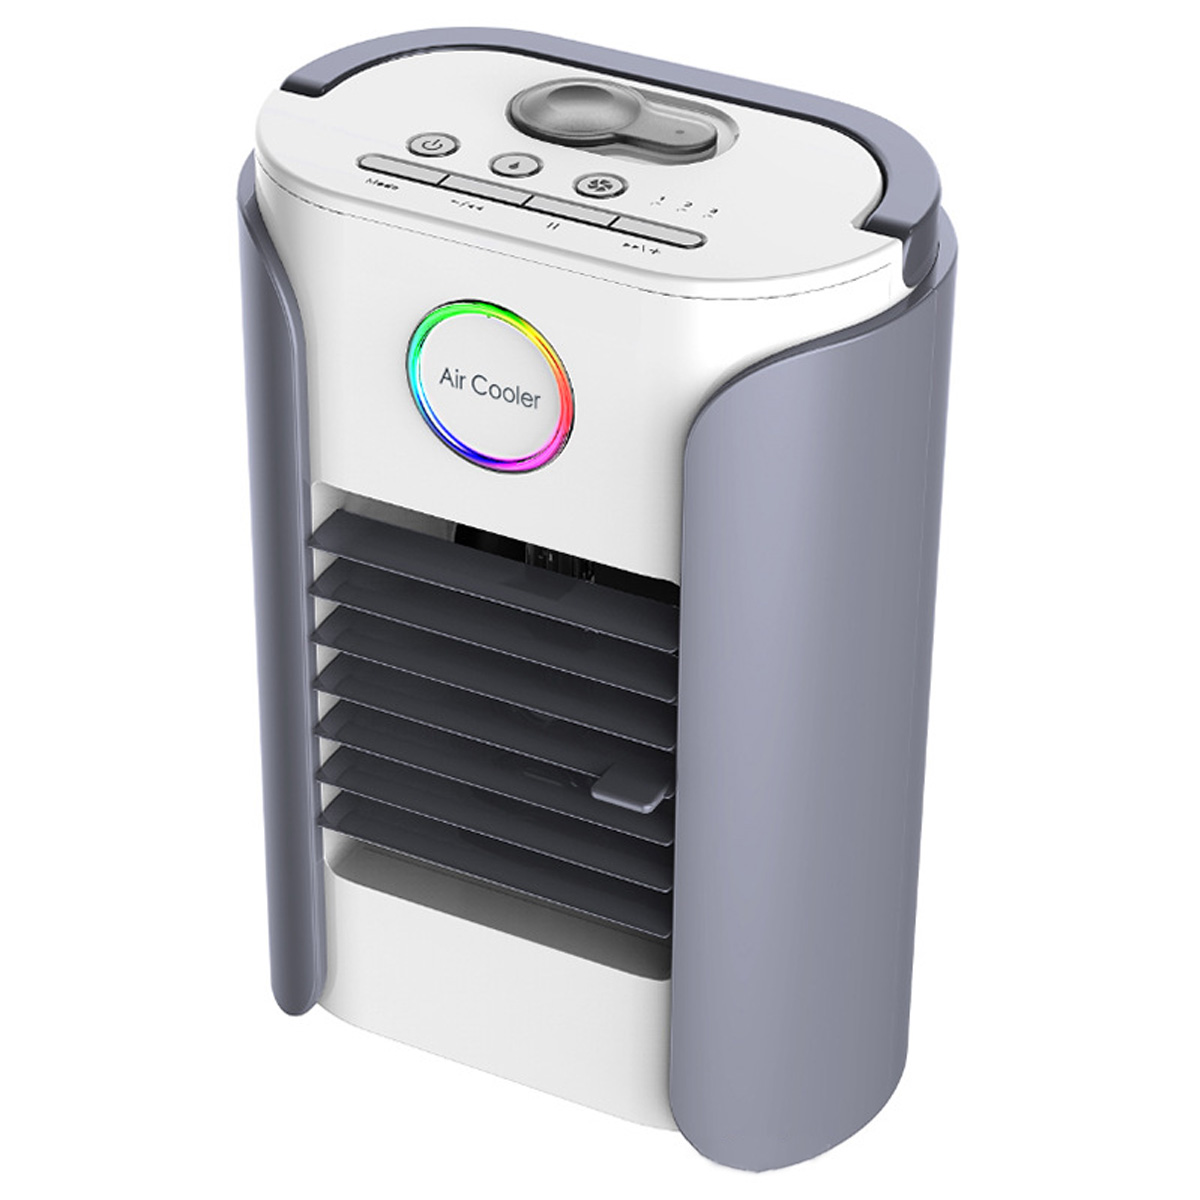 USB-Multifunction-Humidifier-Portable-Air-Conditioner-Fan-Cooling-bluetooth-Speaker-Gifts-for-Family-1675300-1